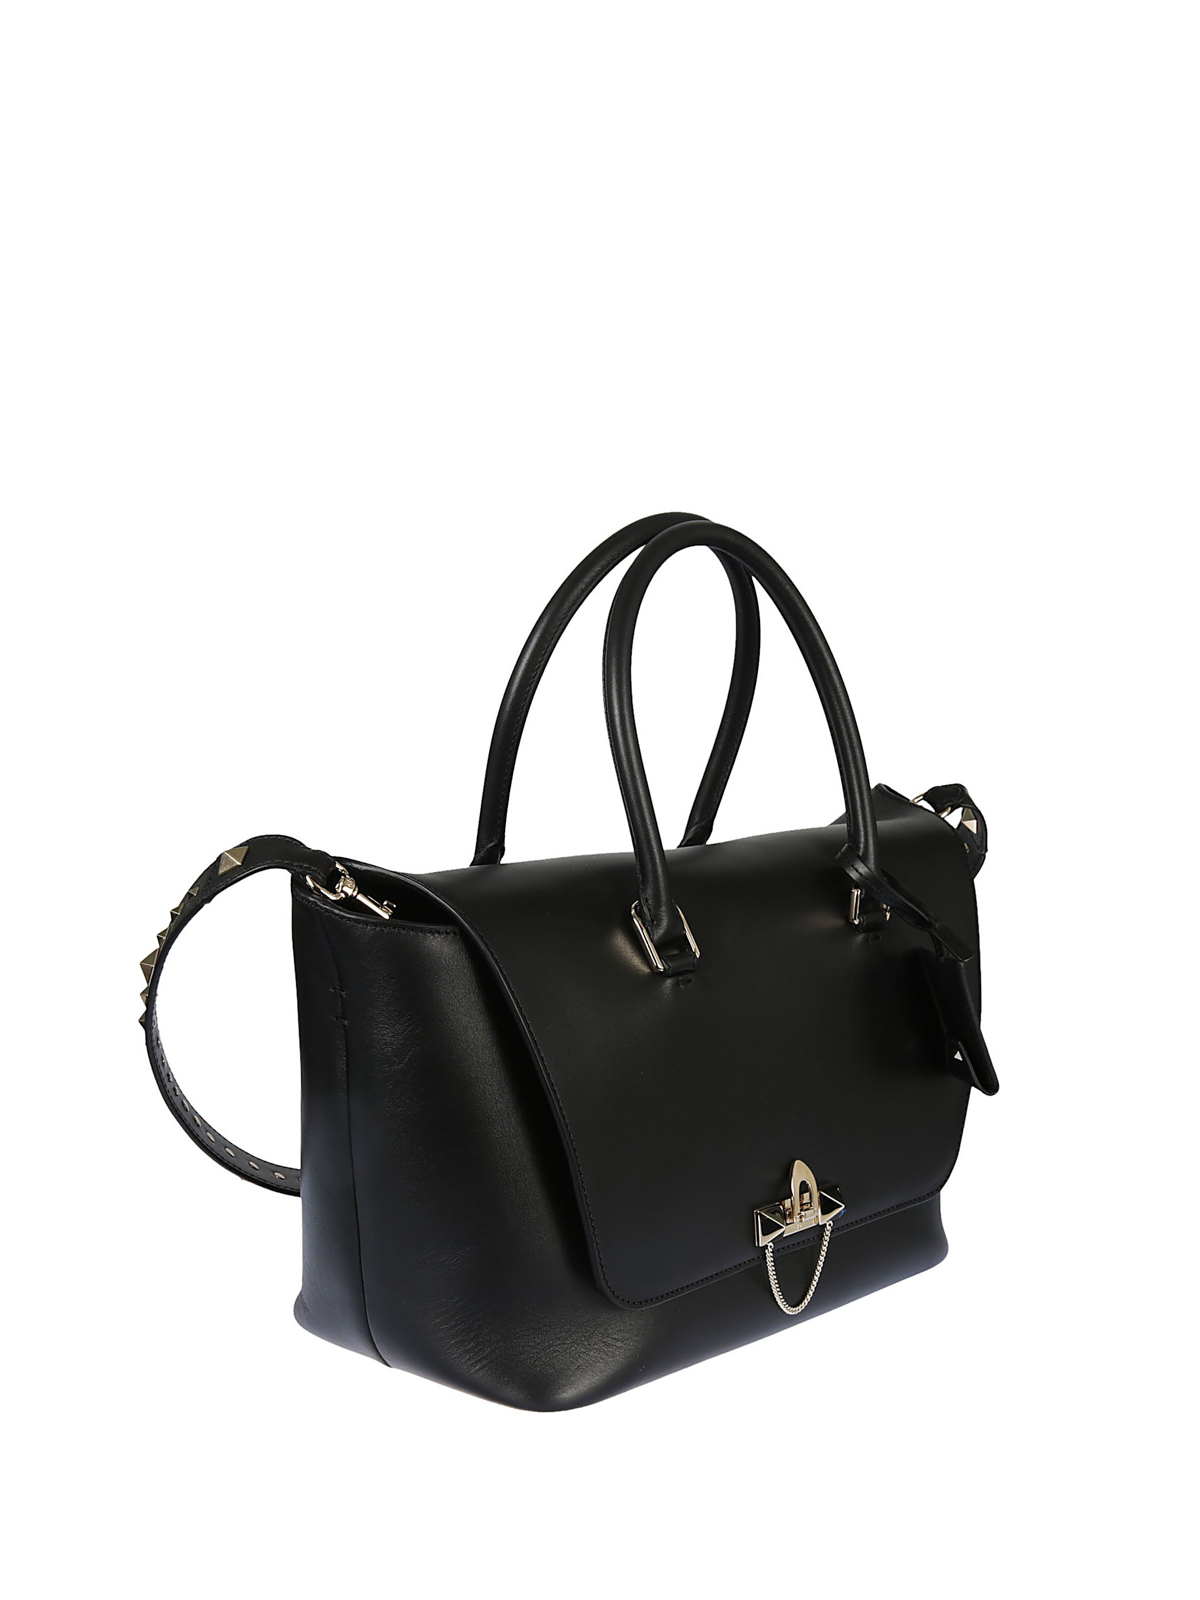 Bowling bags Valentino Demilune black leather satchel - NW0B0A46MIV0NO